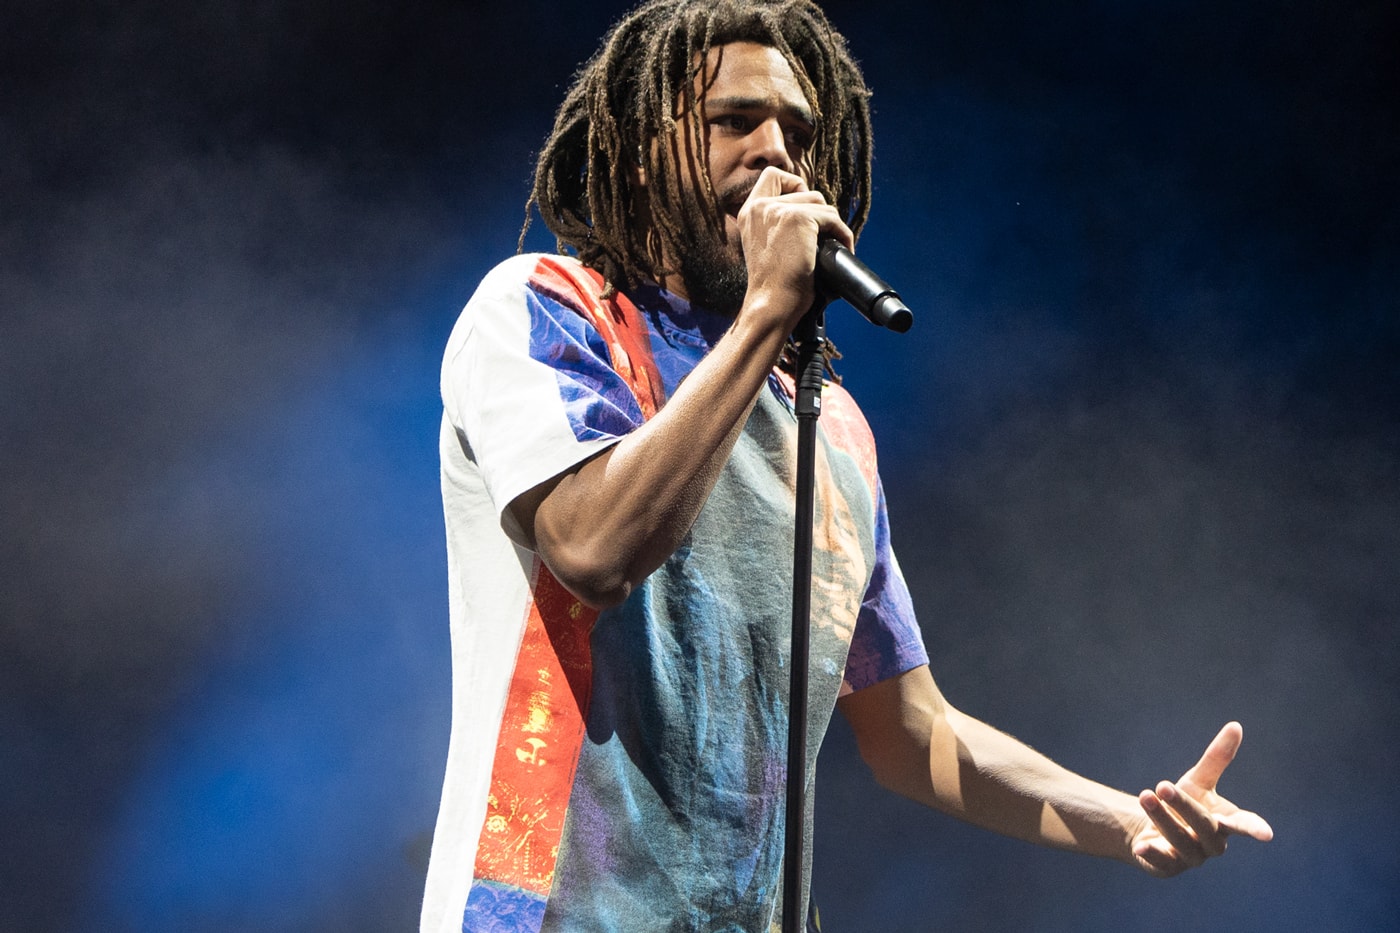 j-coles-90-minute-hbo-documentary-forest-hills-drive-homecoming-is-here